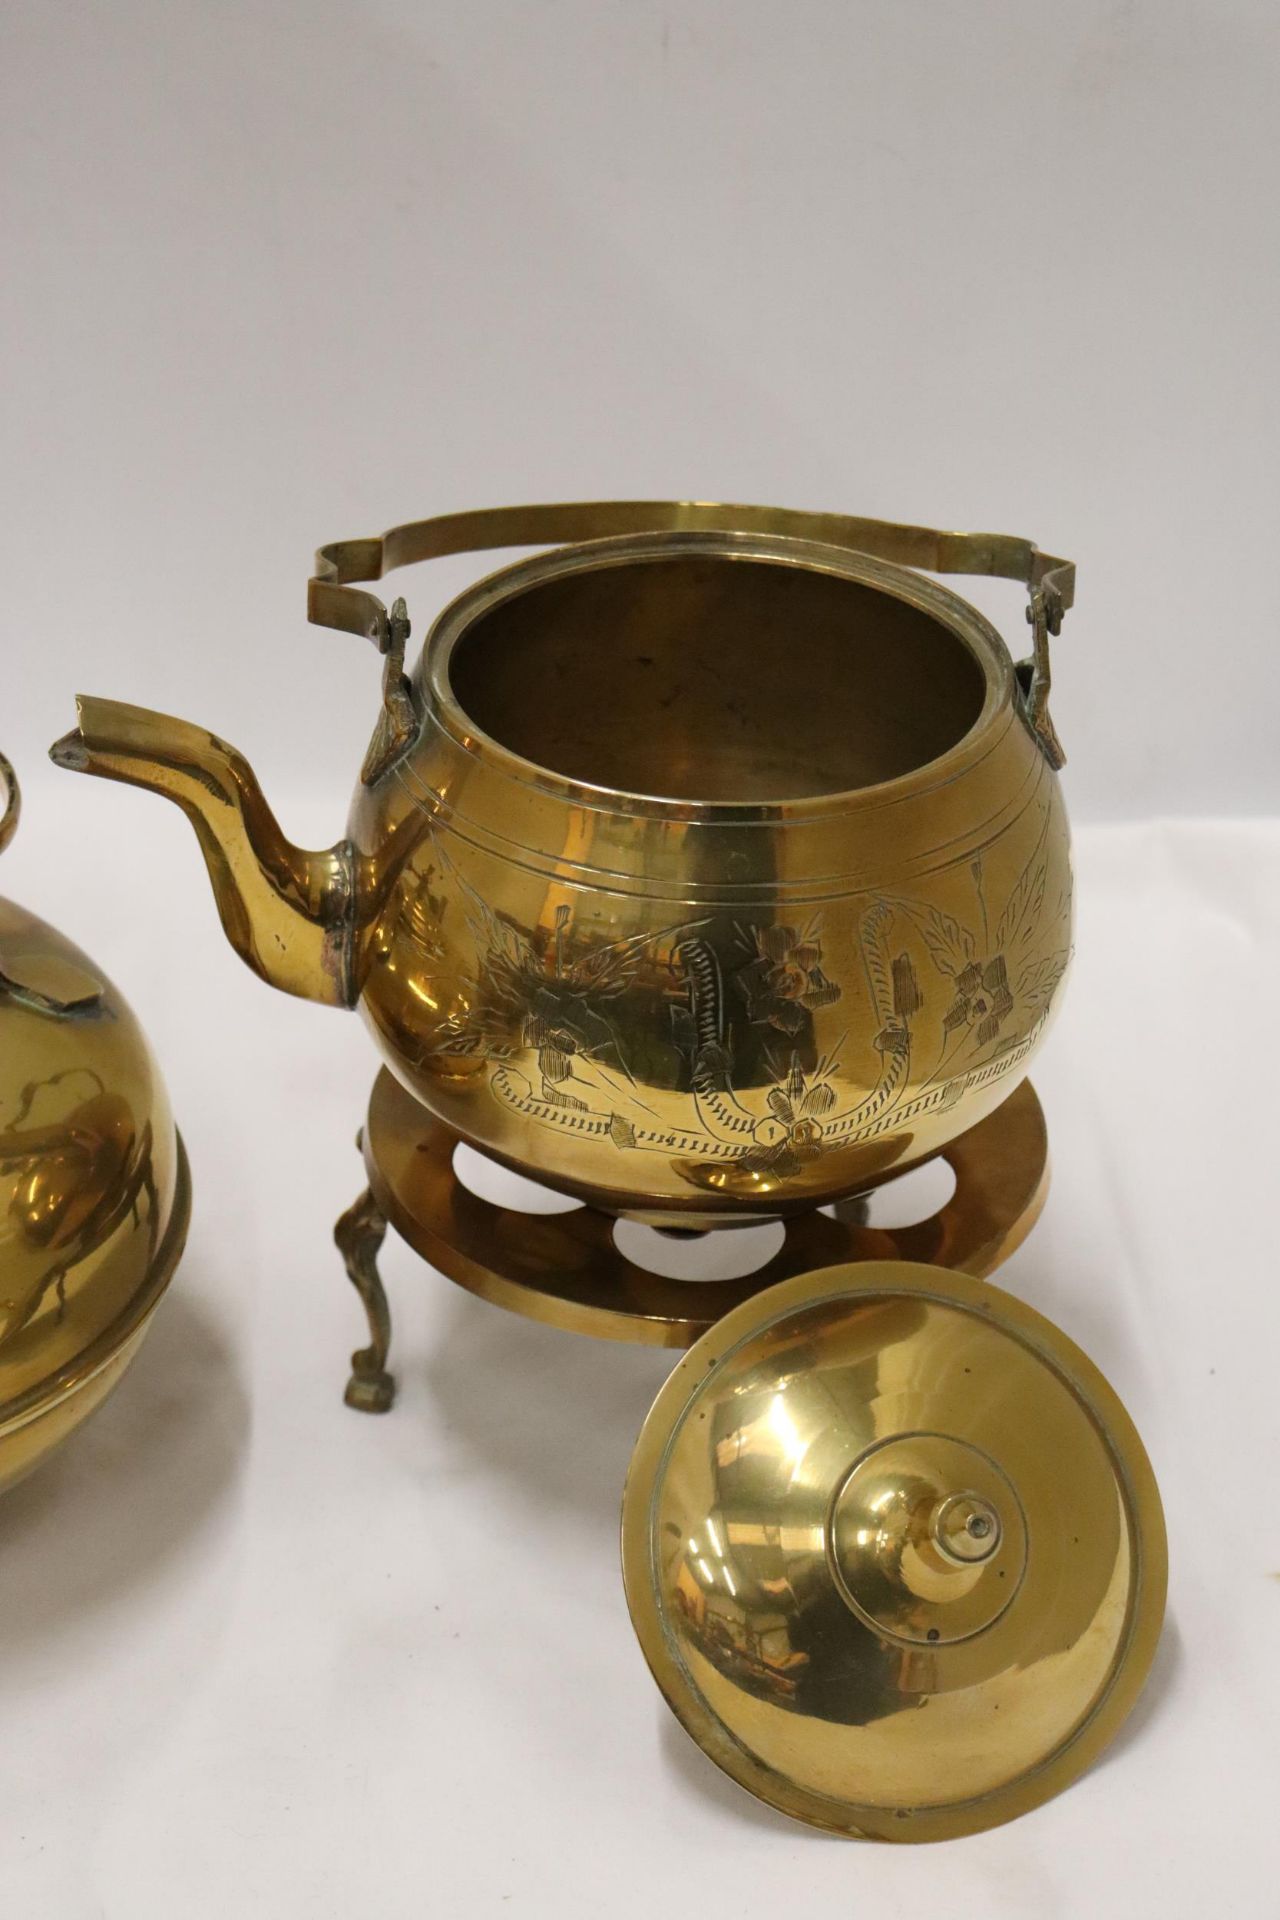 TWO BRASS KETTLES, A CLOISONNE KETTLE AND A TRIVET - Image 6 of 8